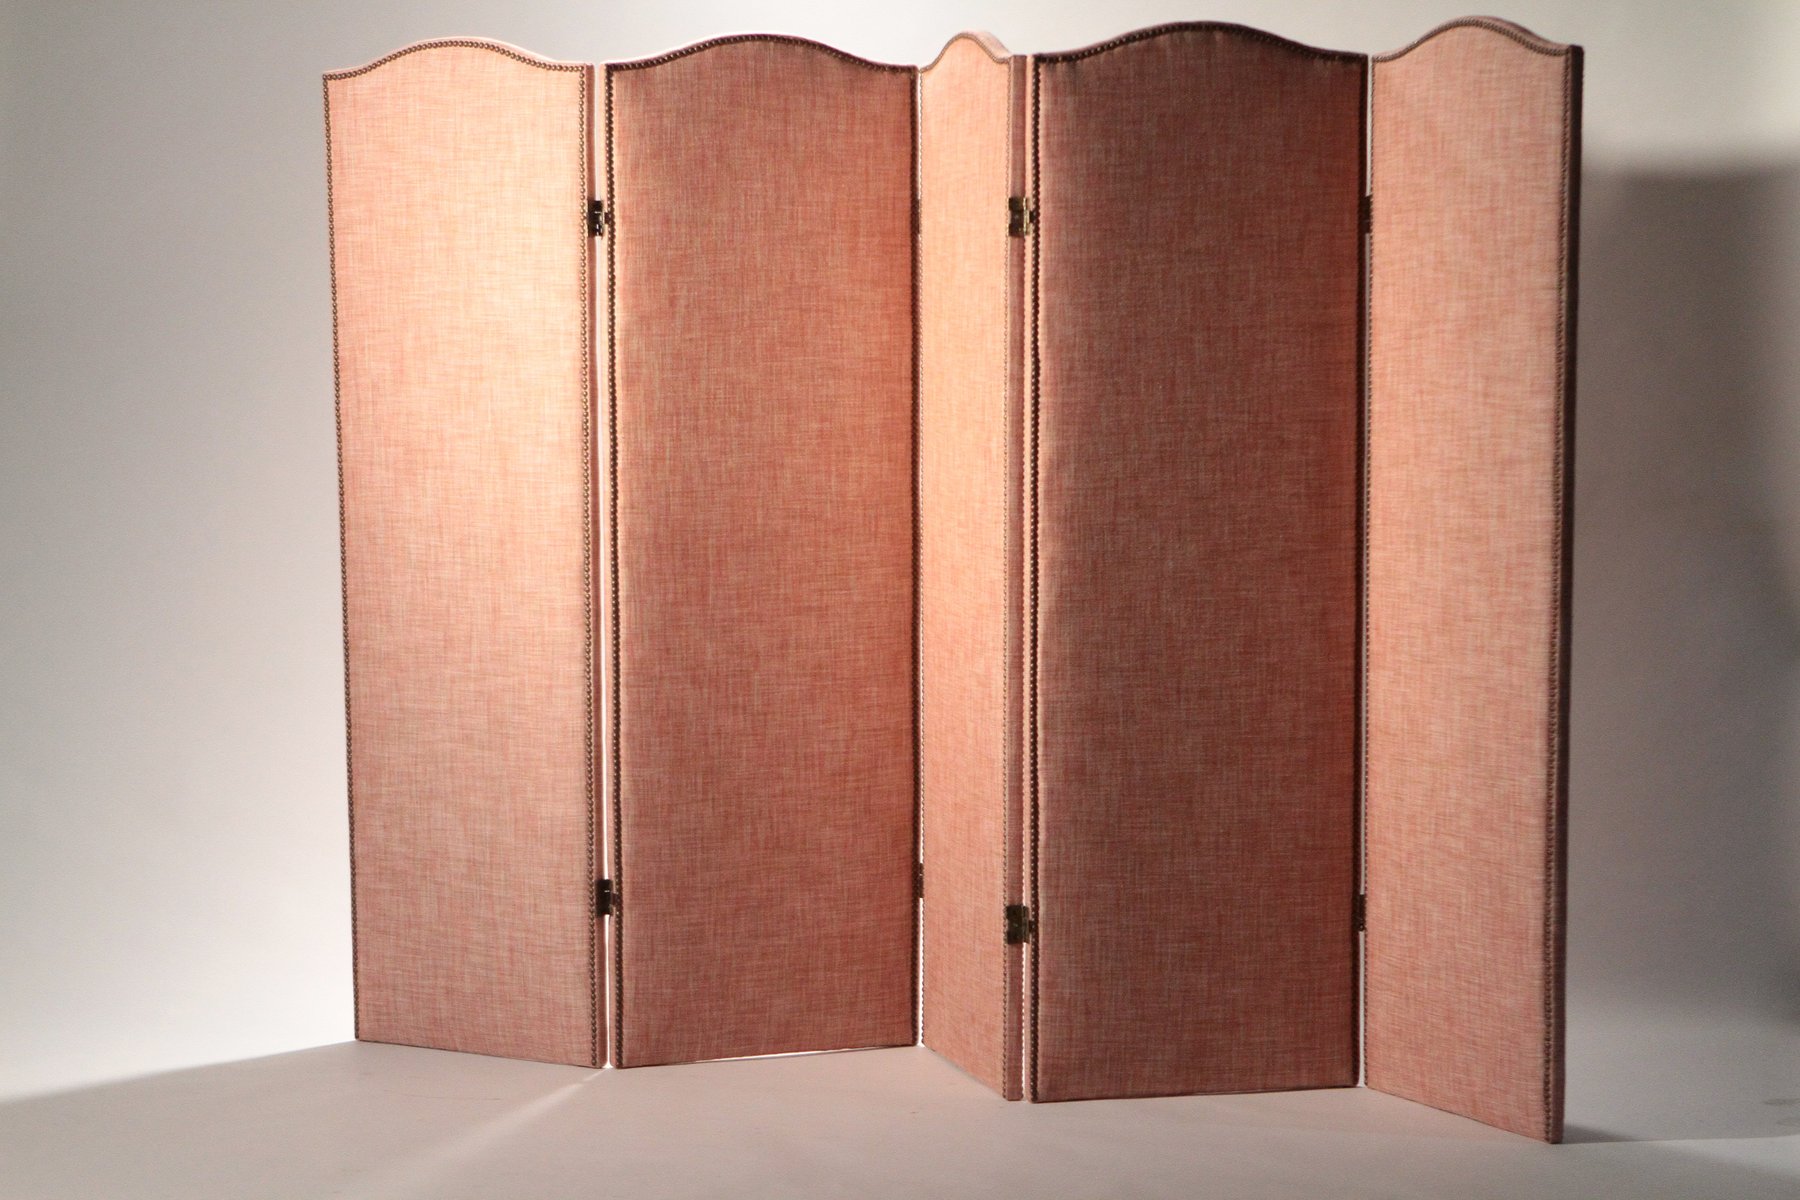 Vintage Upholstered Folding Screen, 1920s for sale at Pamono